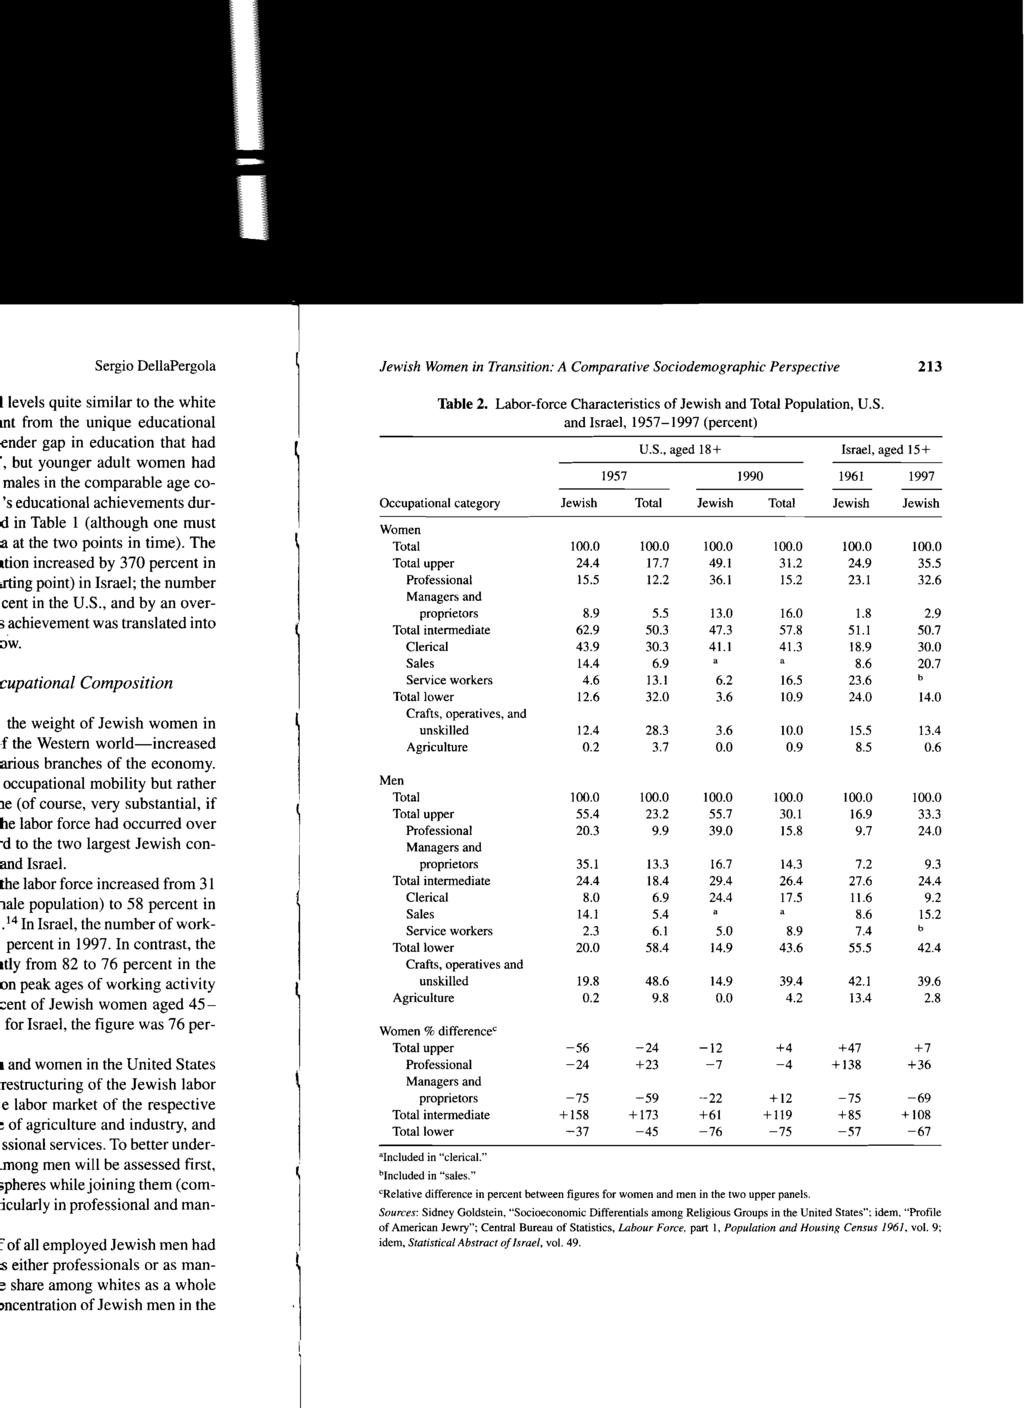 Jewish Women in Transition: A Comparative Sociodemographic Perspective 213 Table 2. Labor-force Characteristics of Jewish and Total Population, U.S. and Israel, 1957-1997 (percent) U.S., aged 18+ Israel, aged 15 + 1957 1990 1961 1997 -- -- Occupational category Jewish Total Jewish Total Jewish Jewish Women Total 100.